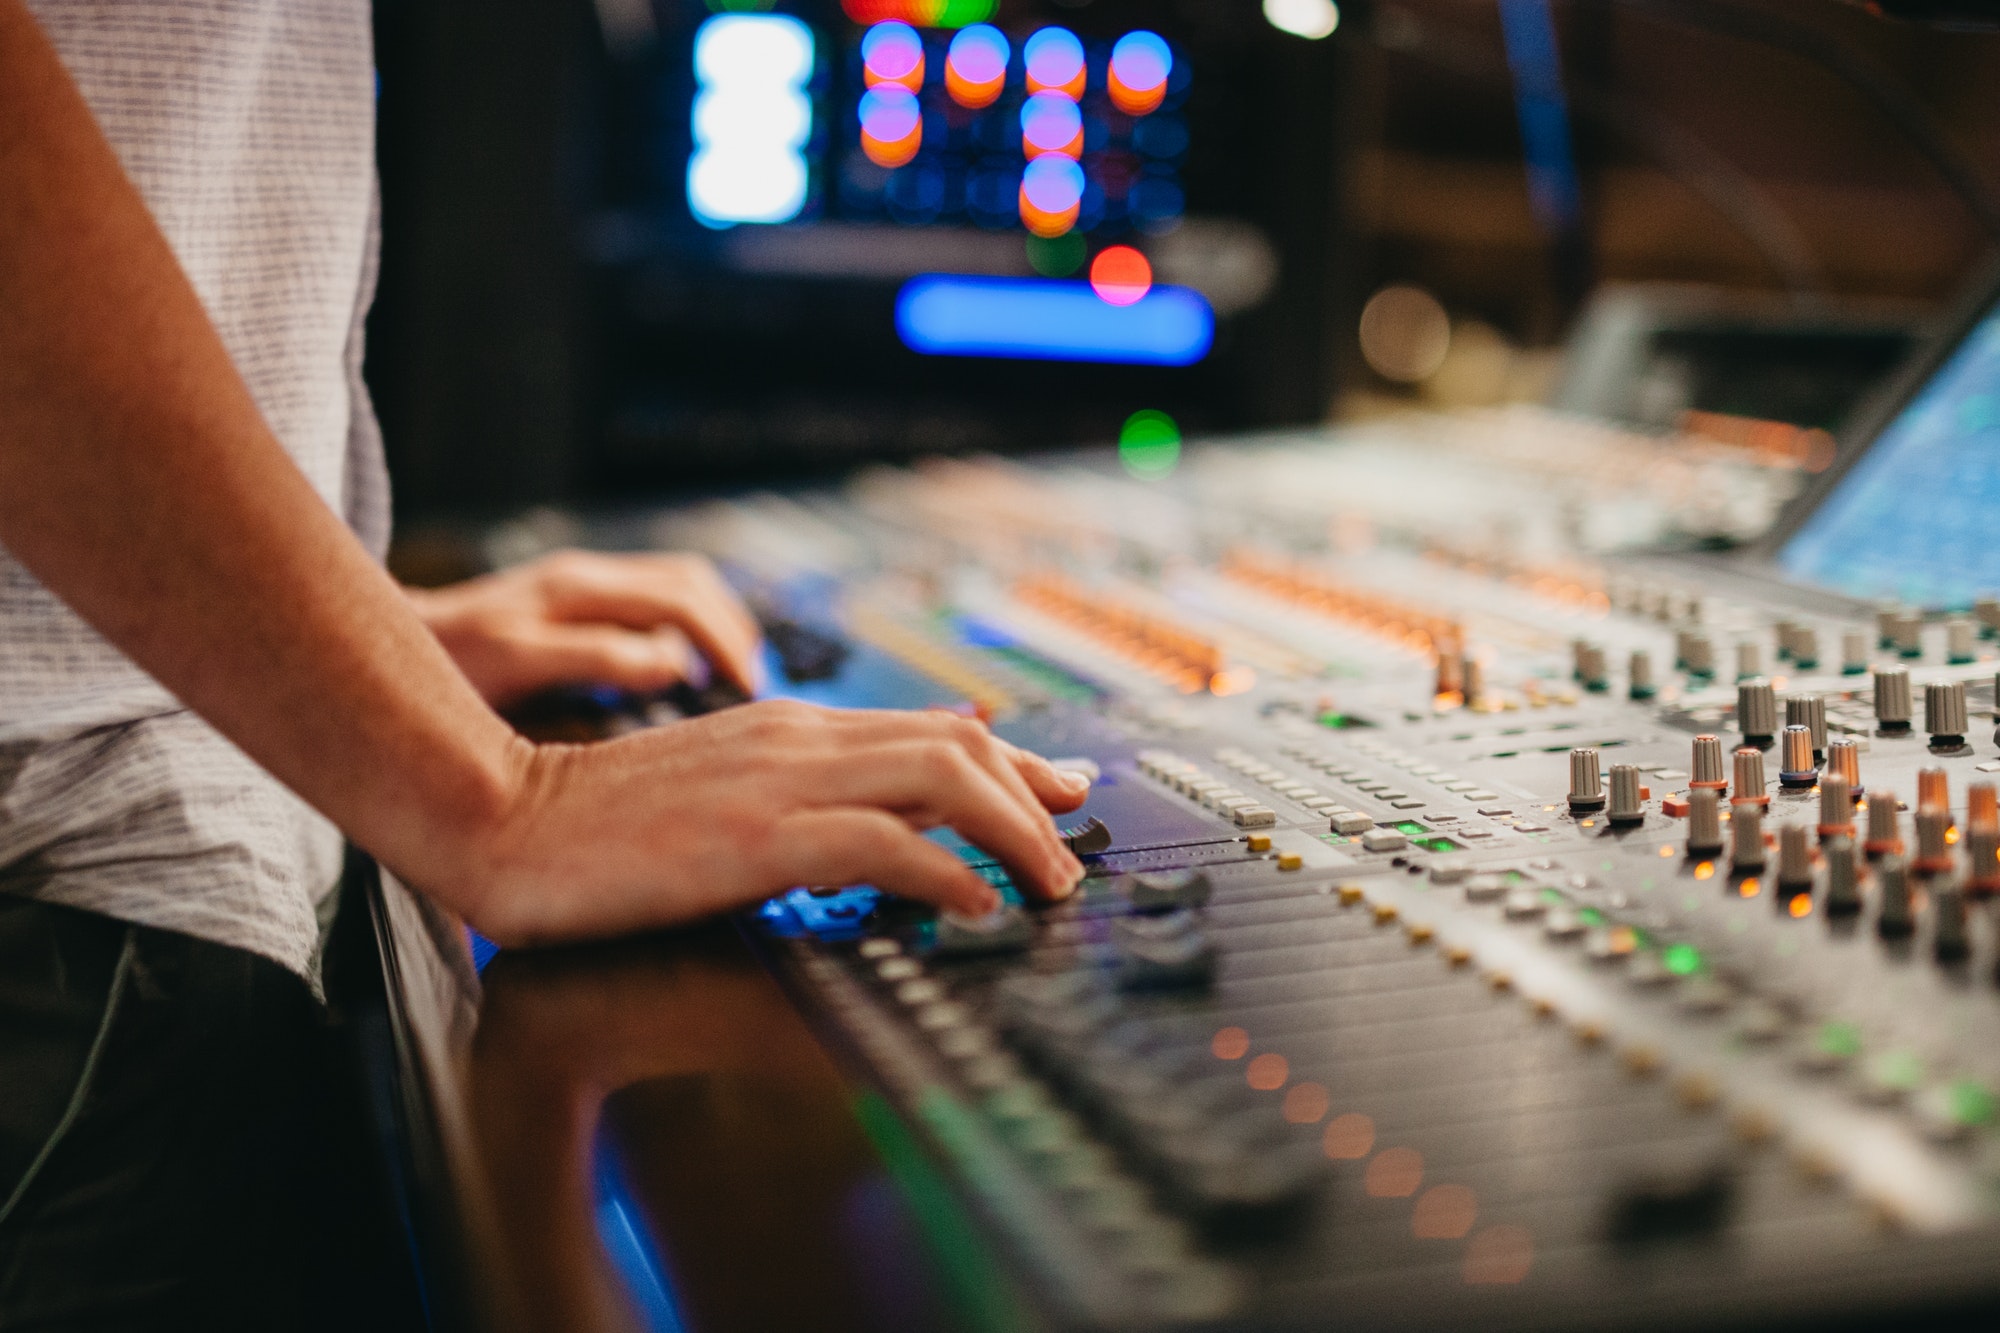 A sound tech works on a mixing board changing levels of the music production.